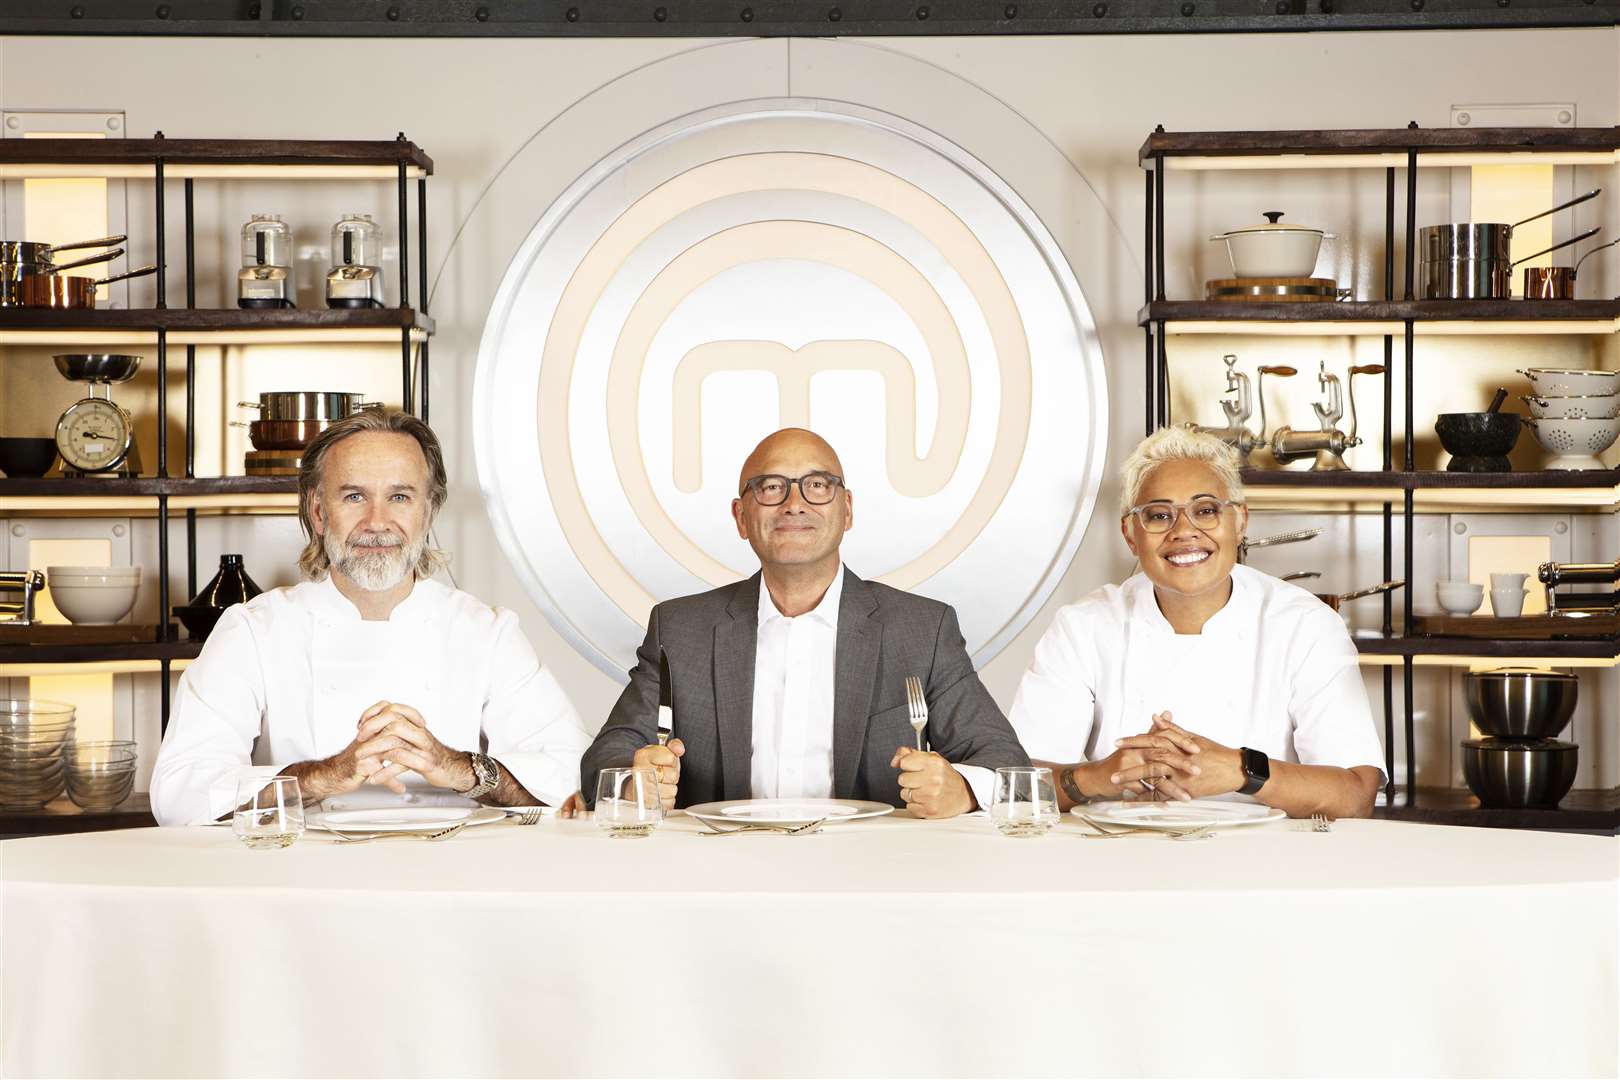 MasterChef judges Marcus Wareing, Gregg Wallace and Monica Galetti.